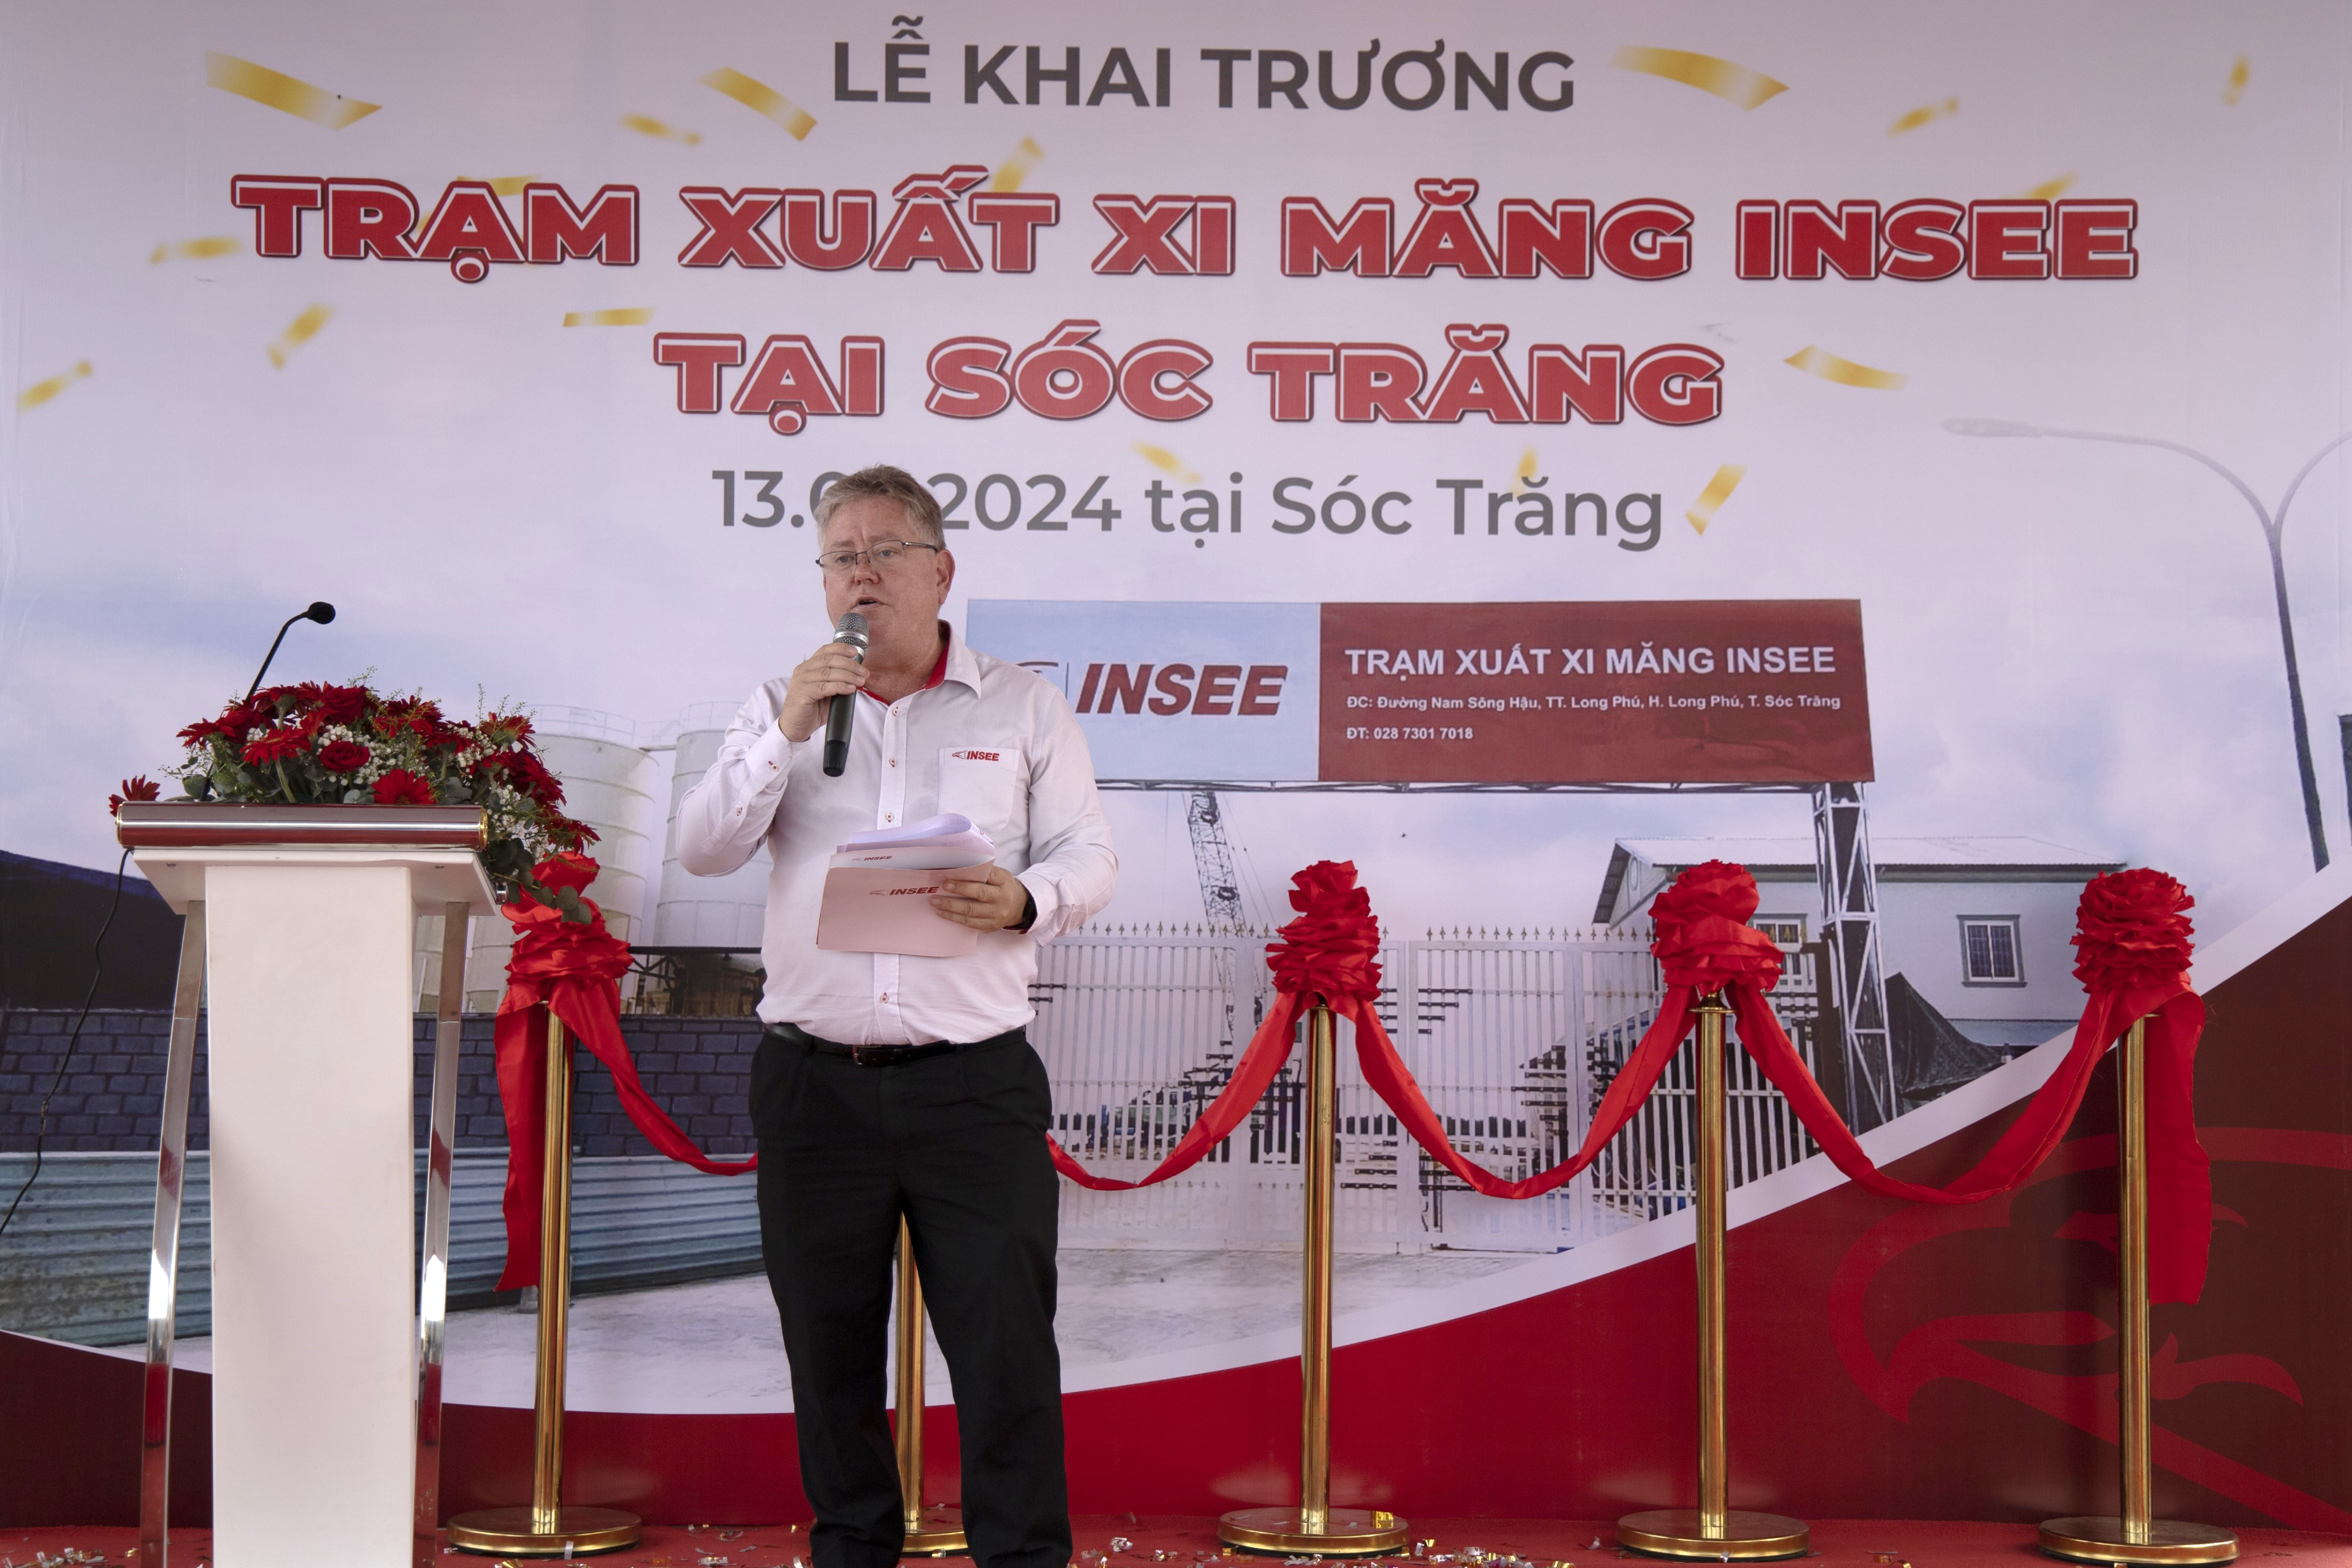 Image 2: Mr. Eamon John Ginley – General Director of INSEE Vietnam, delivered opening speech at the opening ceremony of INSEE dispatch terminal in Soc Trang